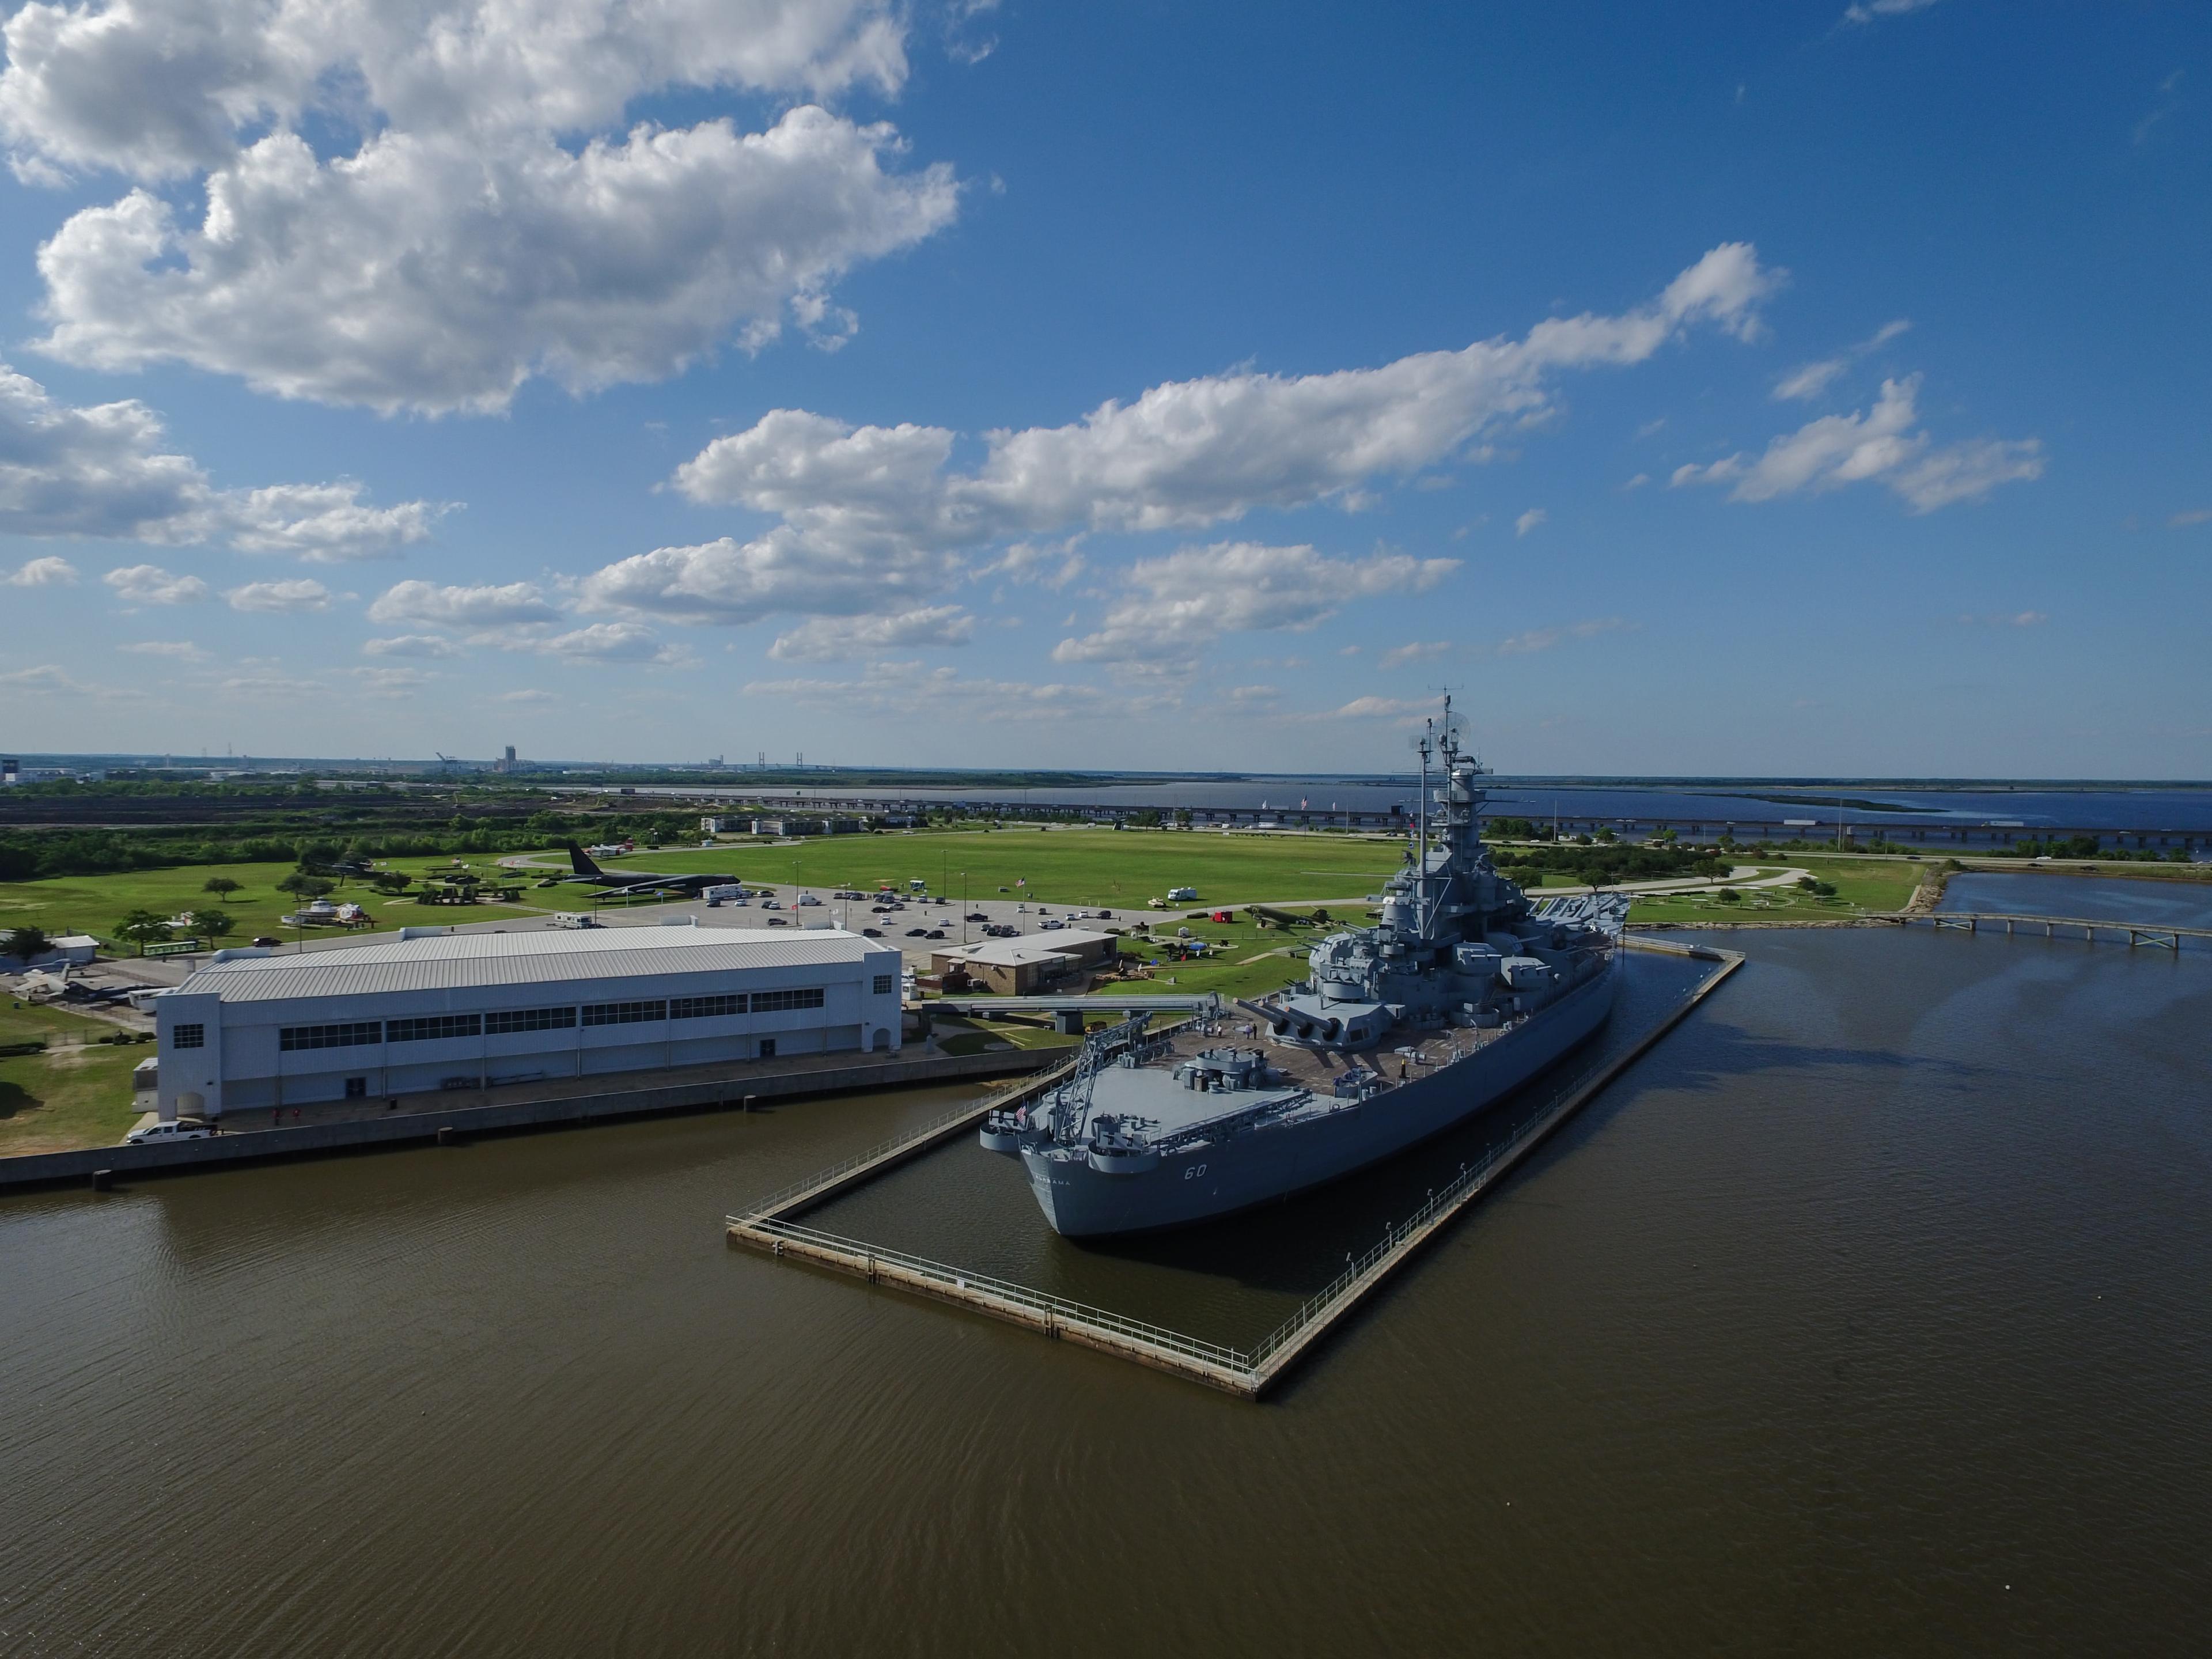 View from above of the USS Alabama in Mobile Alabama.